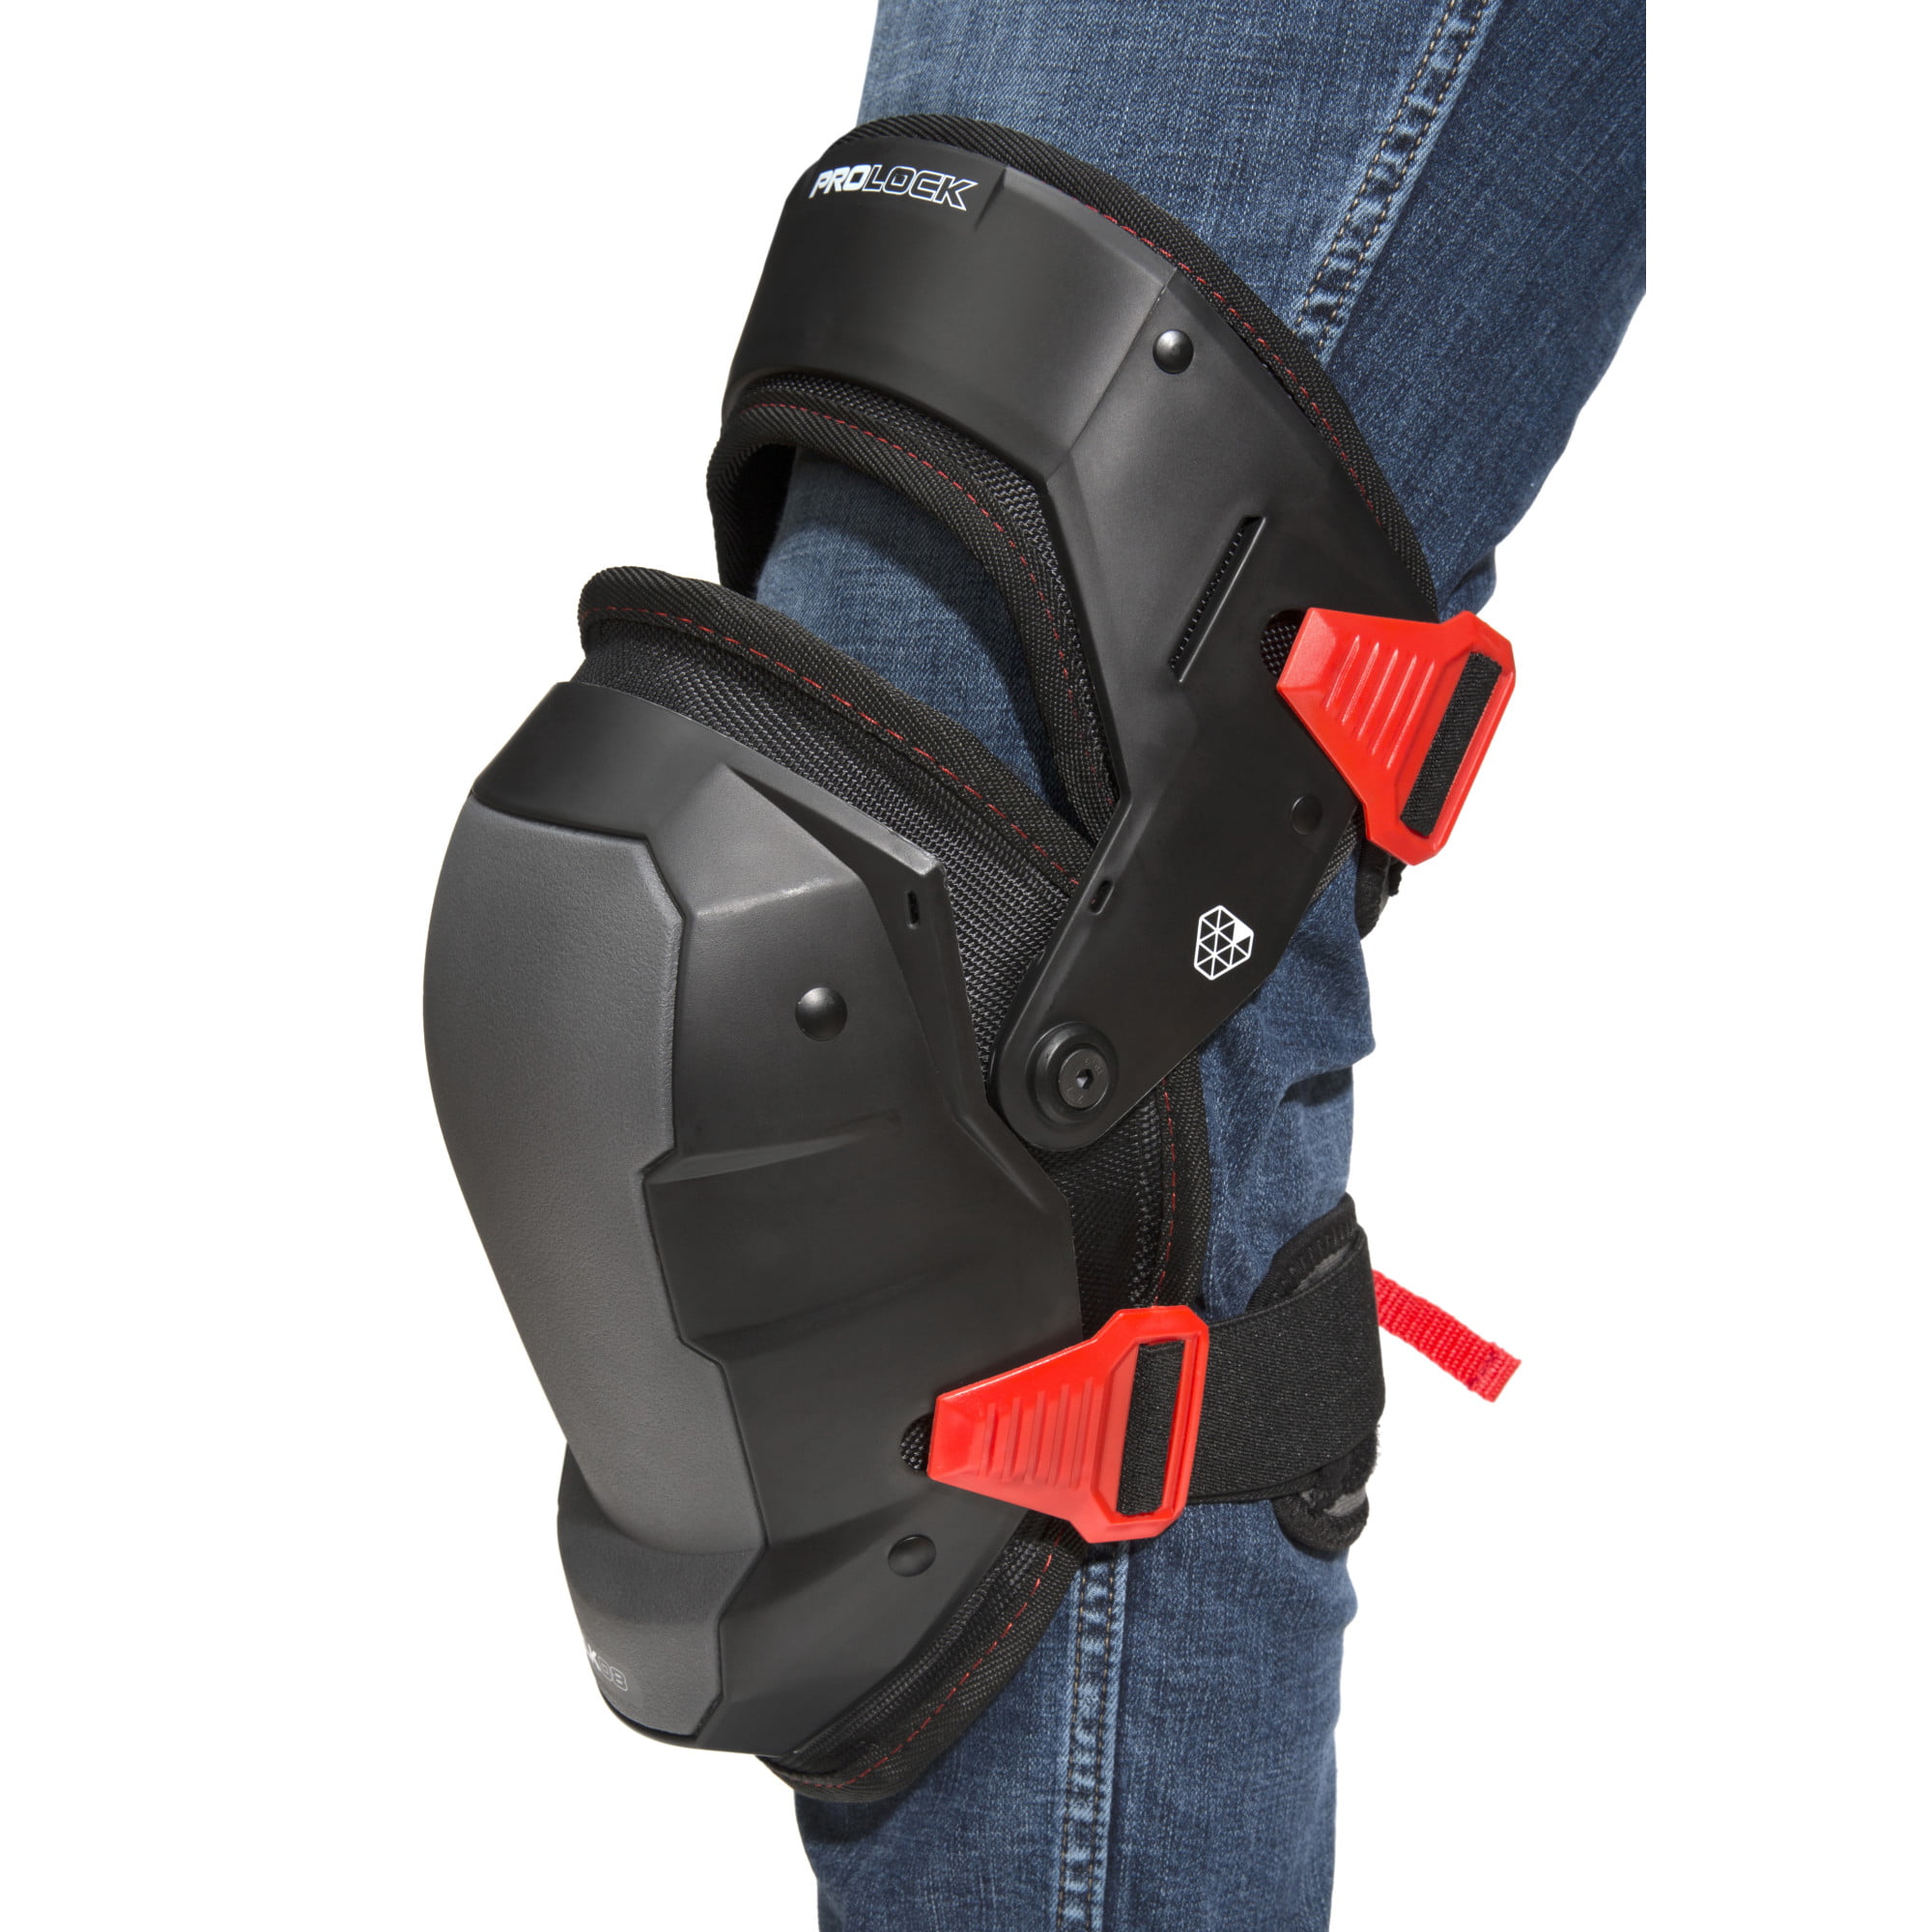 PROLOCK 93181 Professional Construction Gel Comfort Safety Knee Pads Tactical 